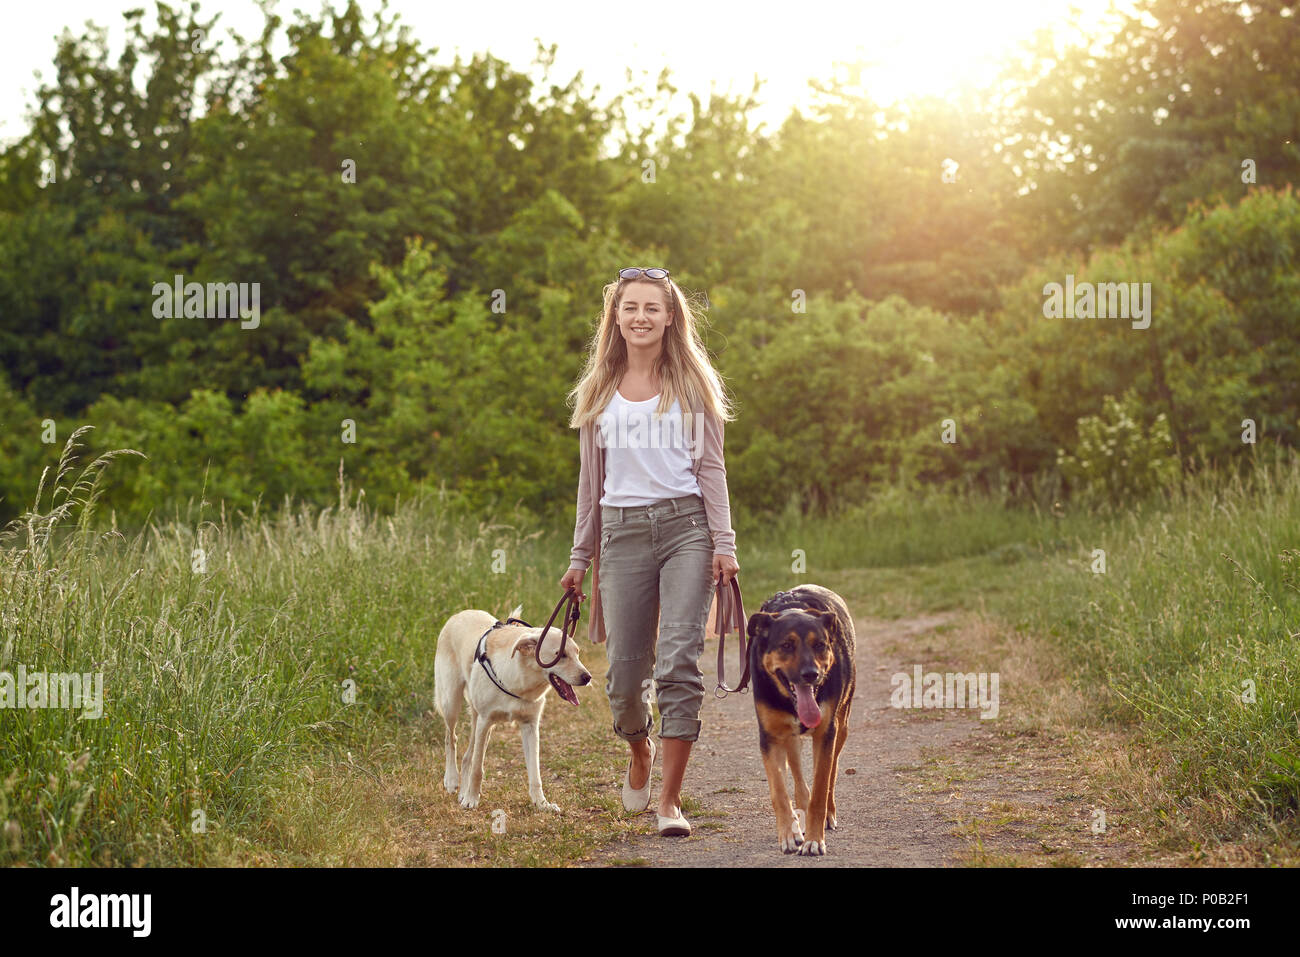 Happy young woman walking her dogs along a grassy rural track in spring looking at the camera Stock Photo